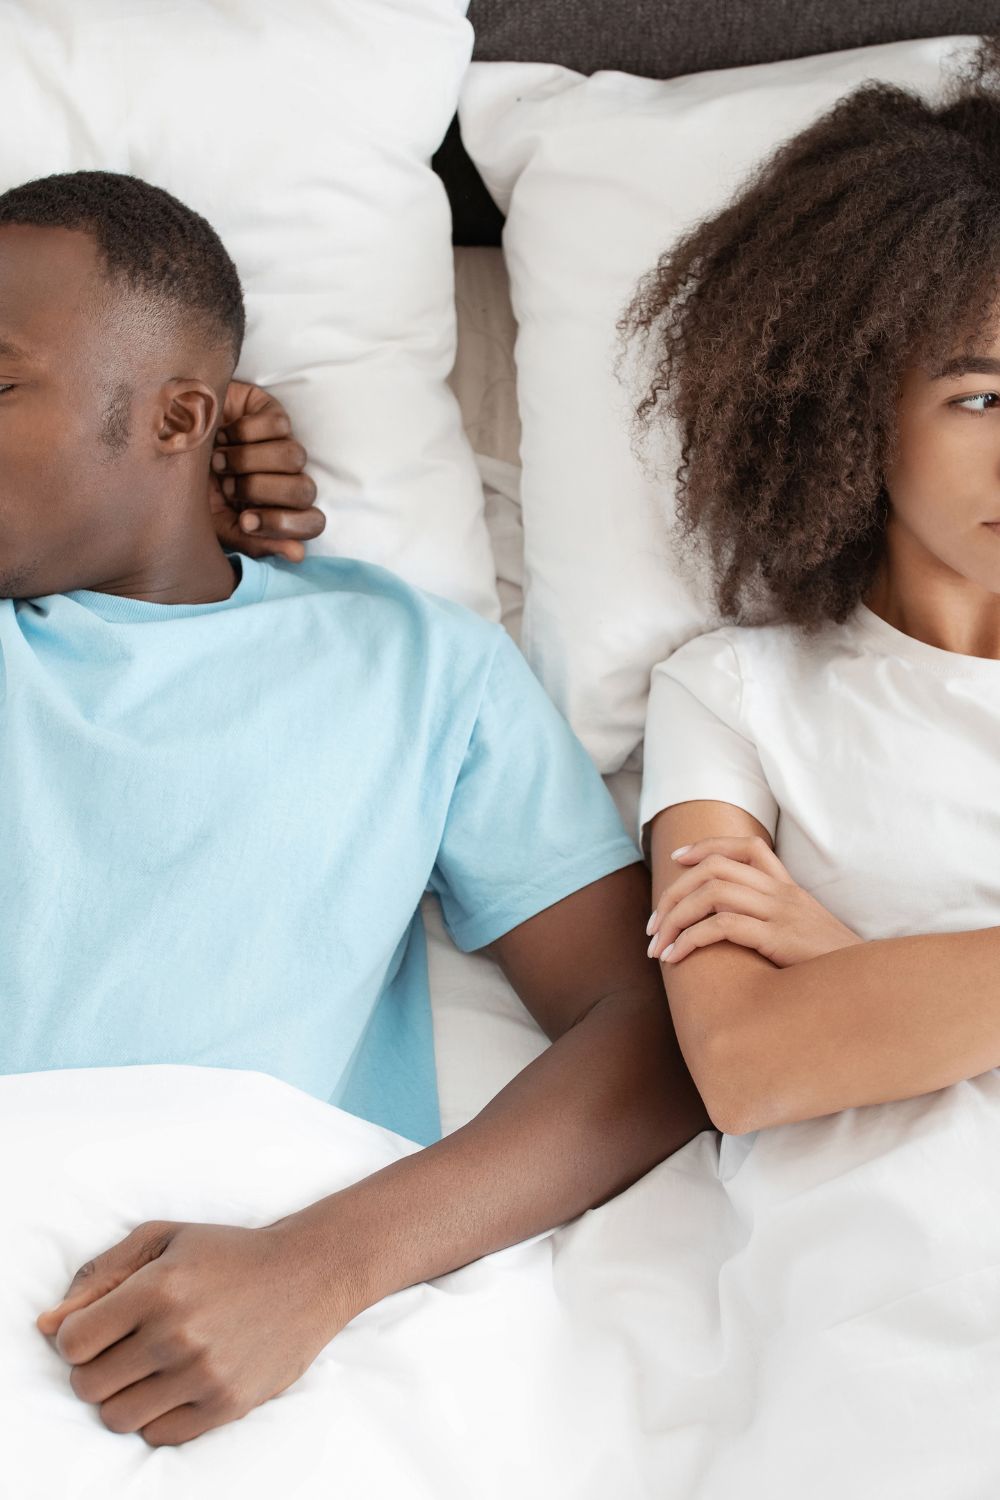 7 Signs Your Husband Loves You But Doesn't Like You